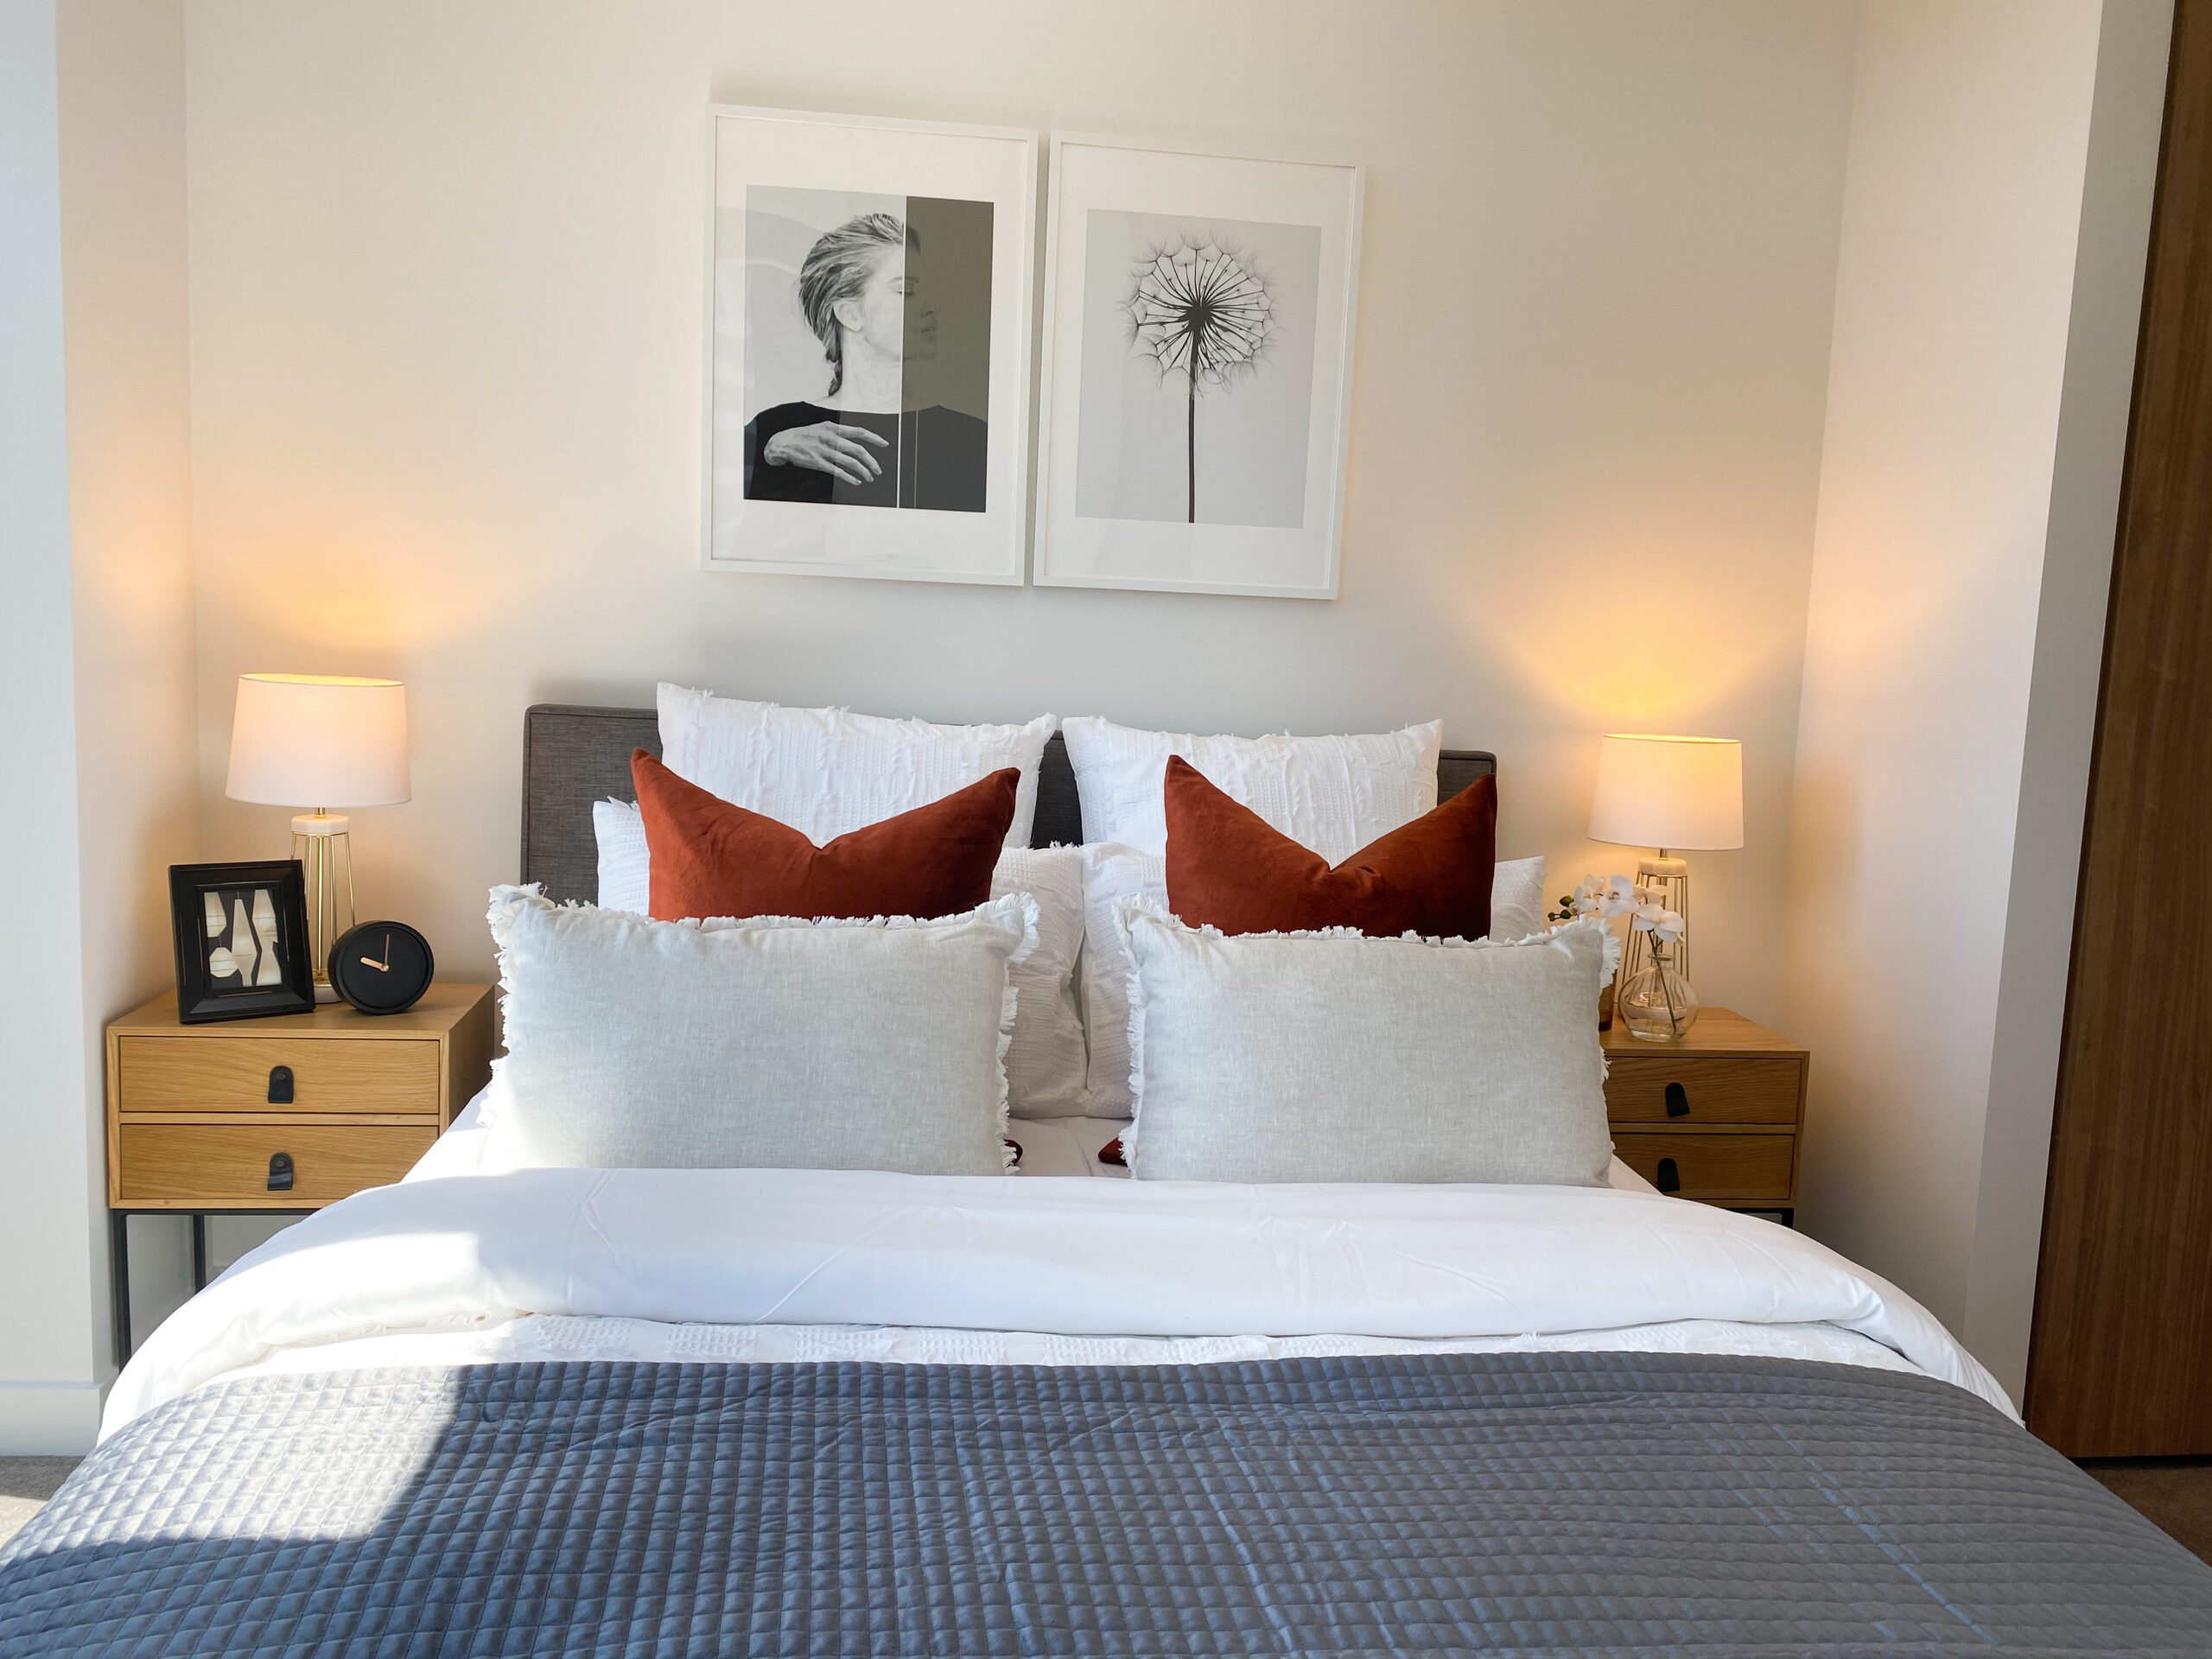 Modern bedroom with decorative burnt orange cushions. Two pieces of art above the bed. Chopped cushions.